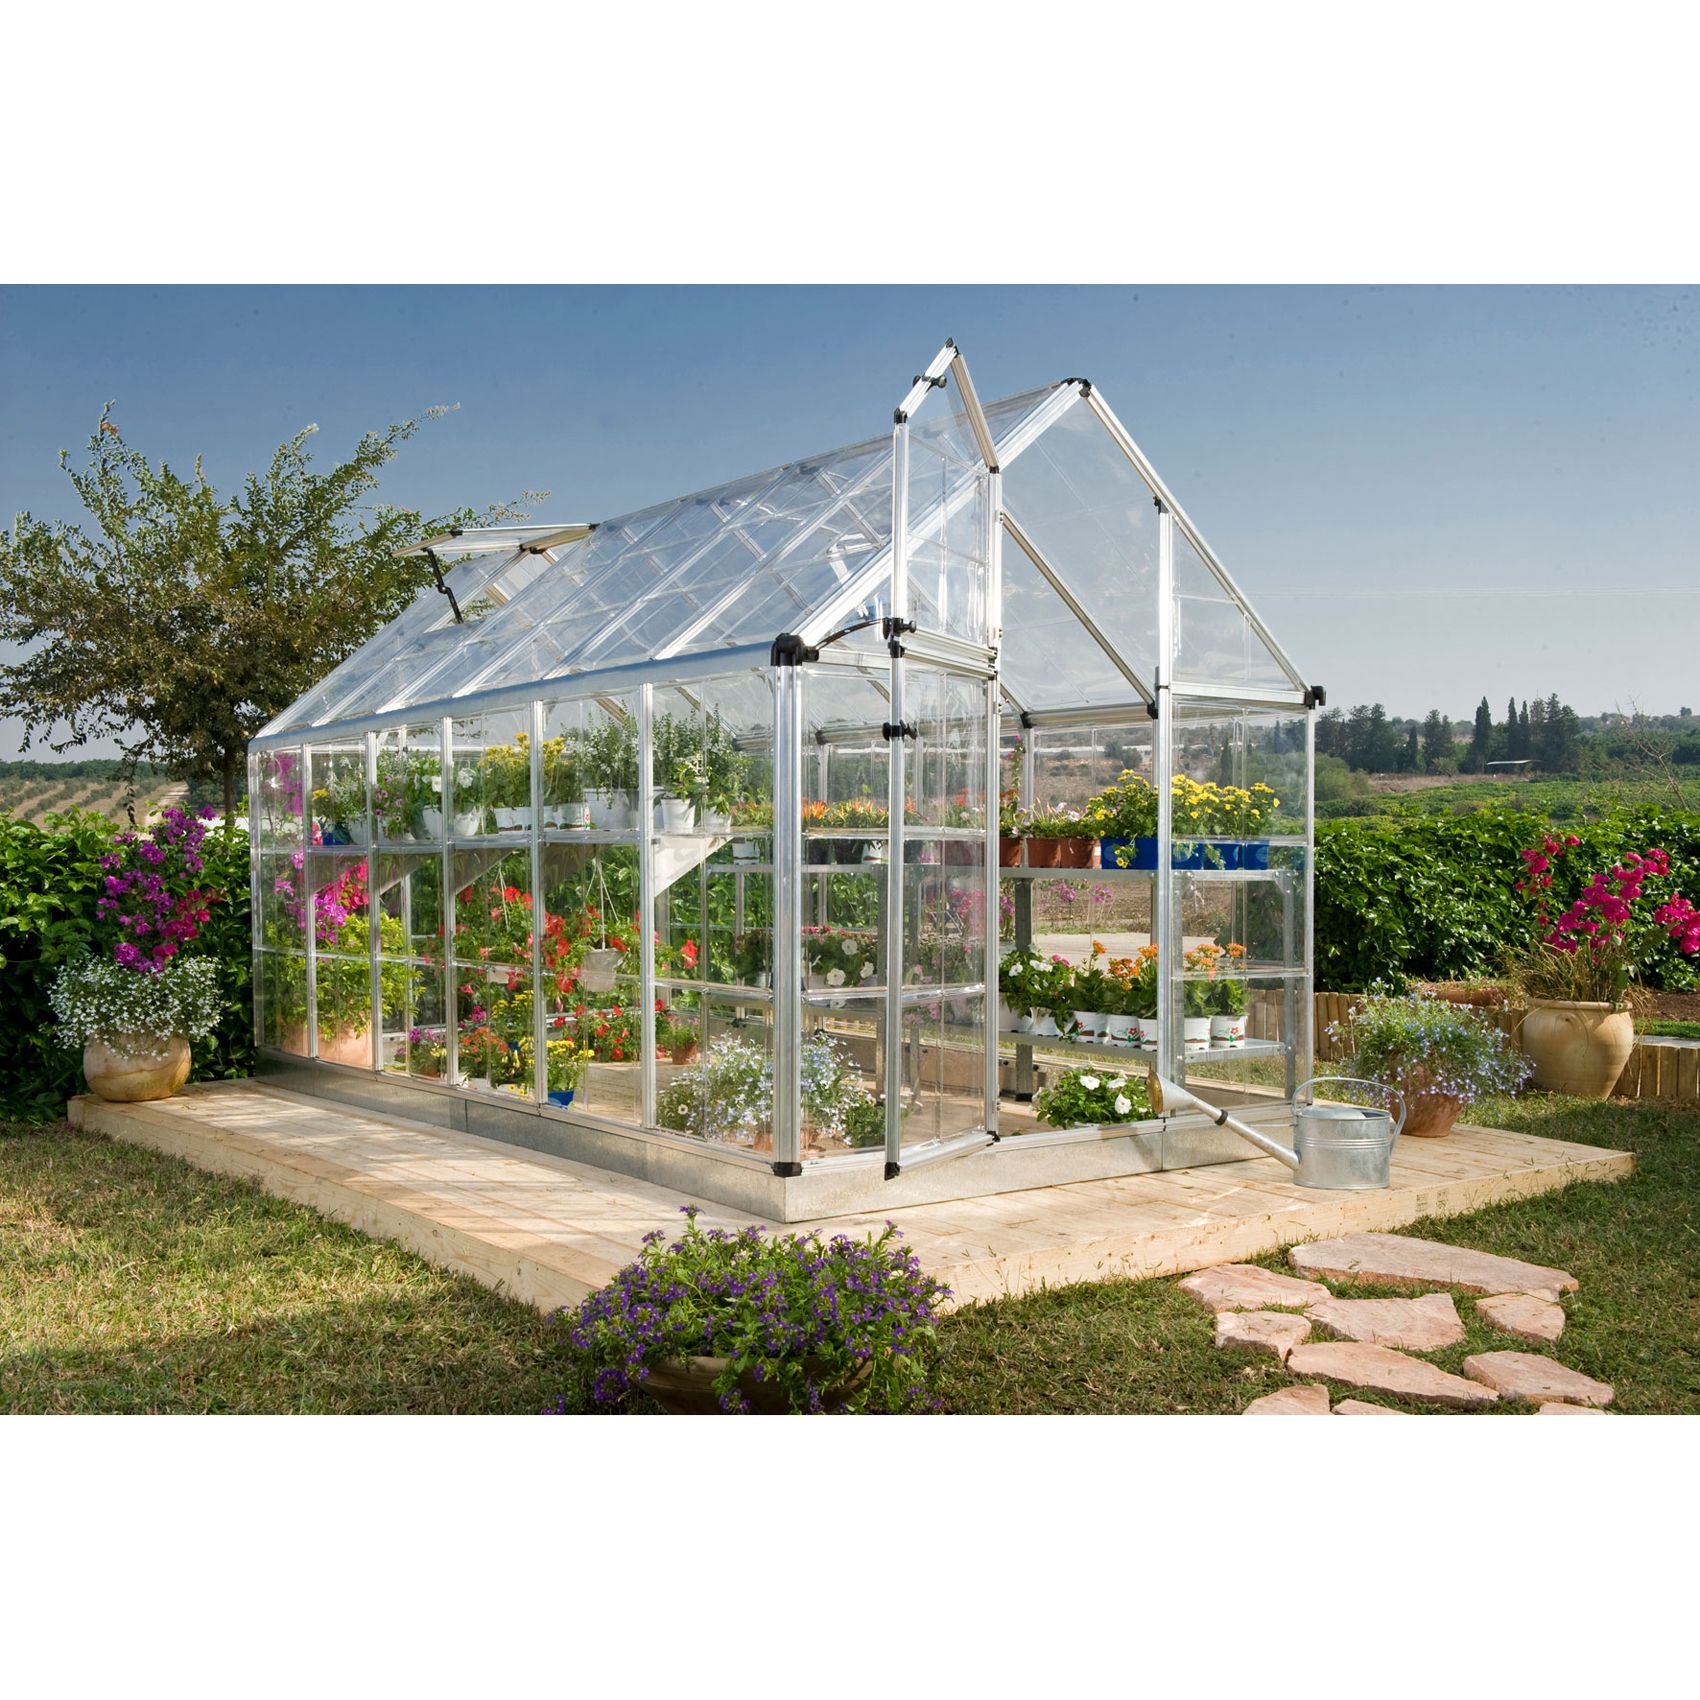 Palram HG6016 Snap and Grow 6 x 16 Greenhouse - Silver